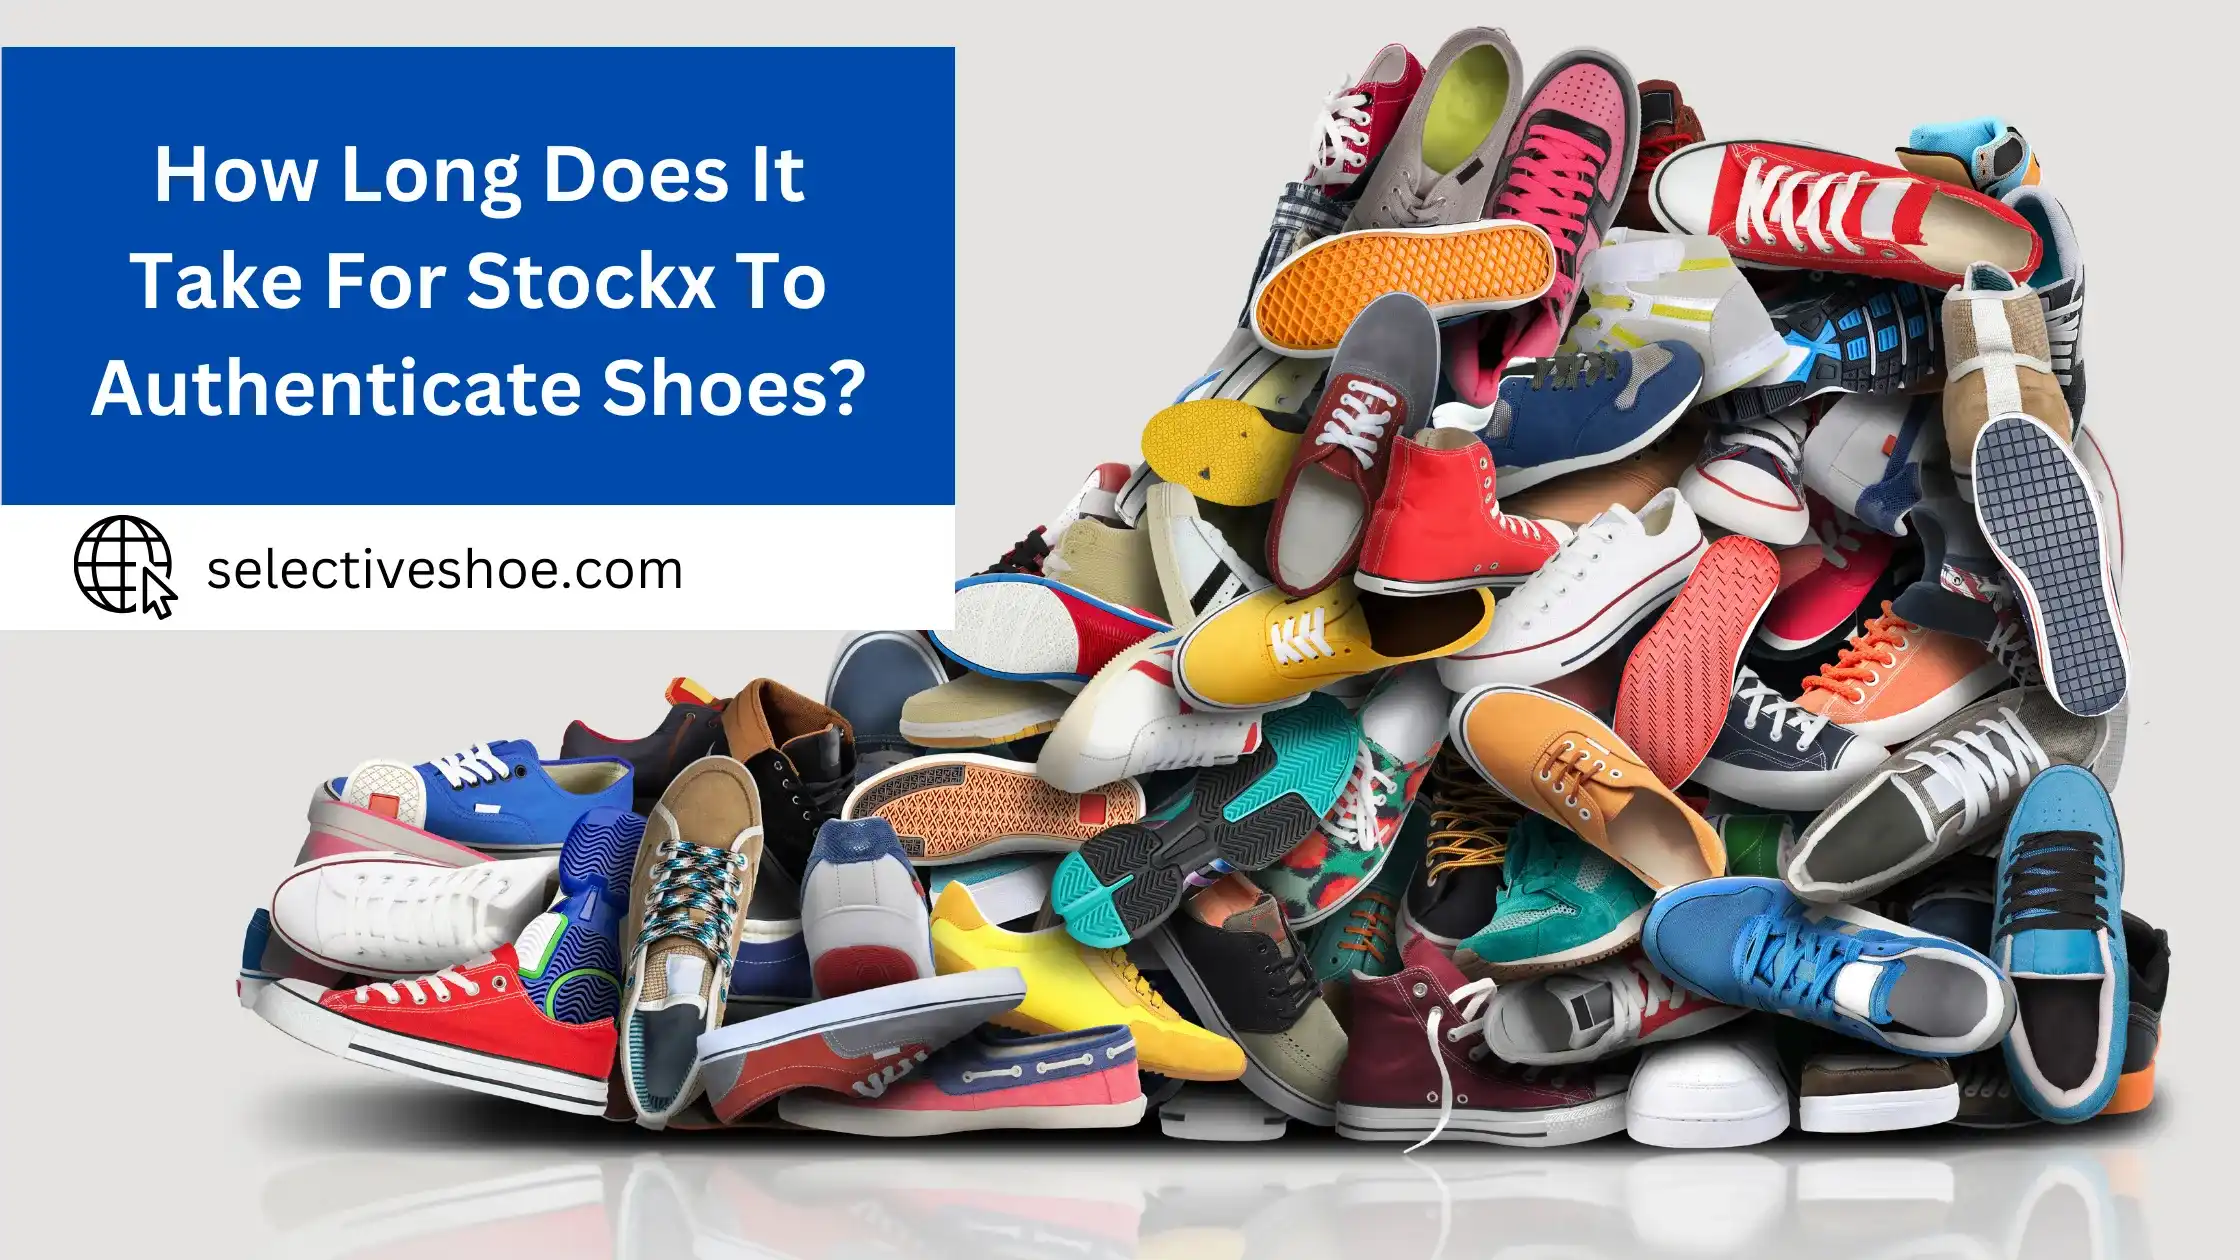 How Long Does it Take For Stockx to Authenticate Shoes?